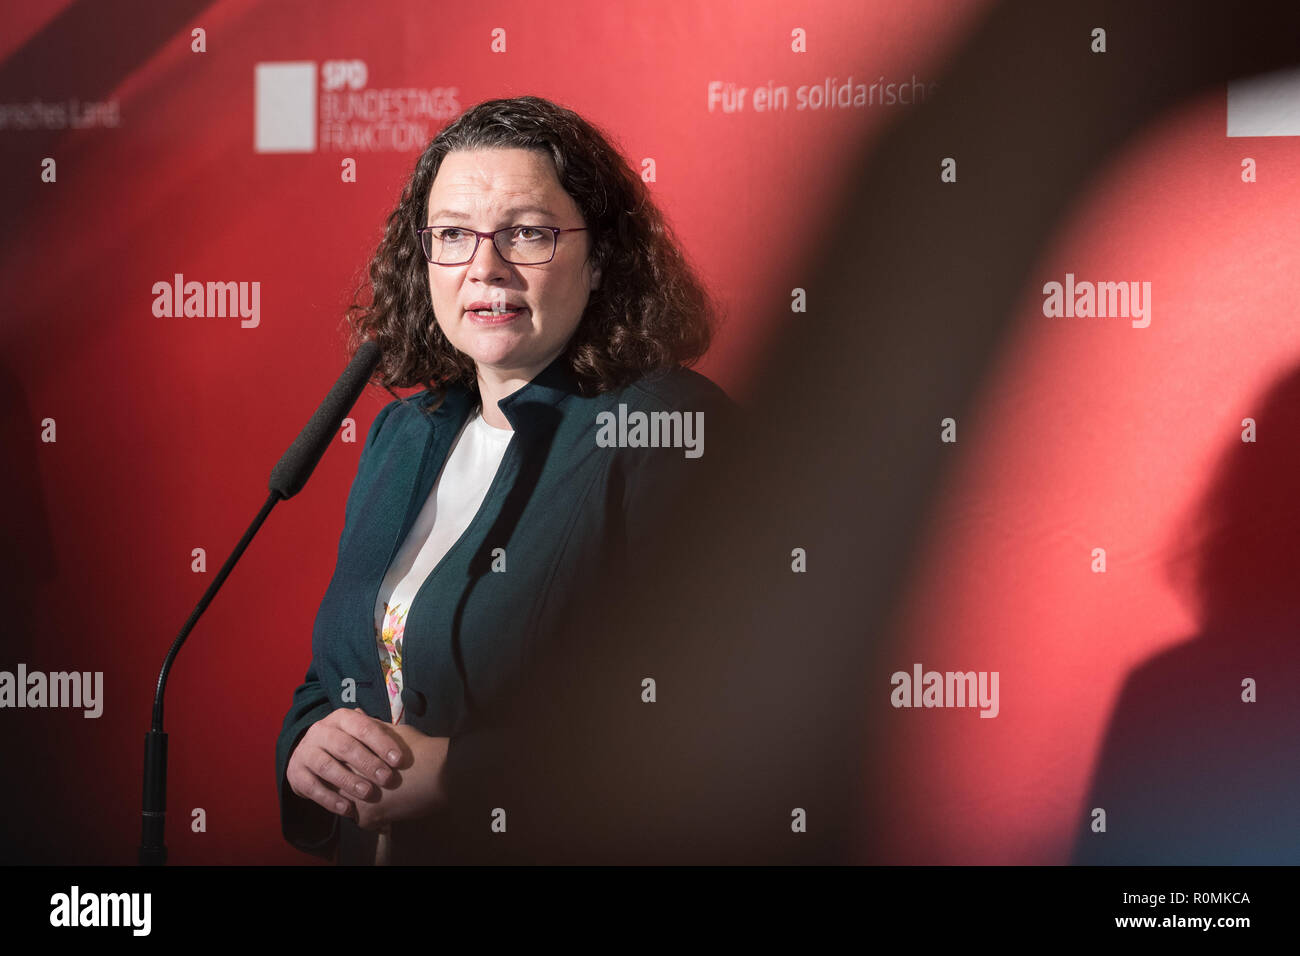 Berlin, Berlin, Germany. 6th Nov, 2018. The leader of the Social Democratic Party (SPD) Andrea Nahles gives a statement before the SPD fraction meeting. Credit: Markus Heine/SOPA Images/ZUMA Wire/Alamy Live News Stock Photo